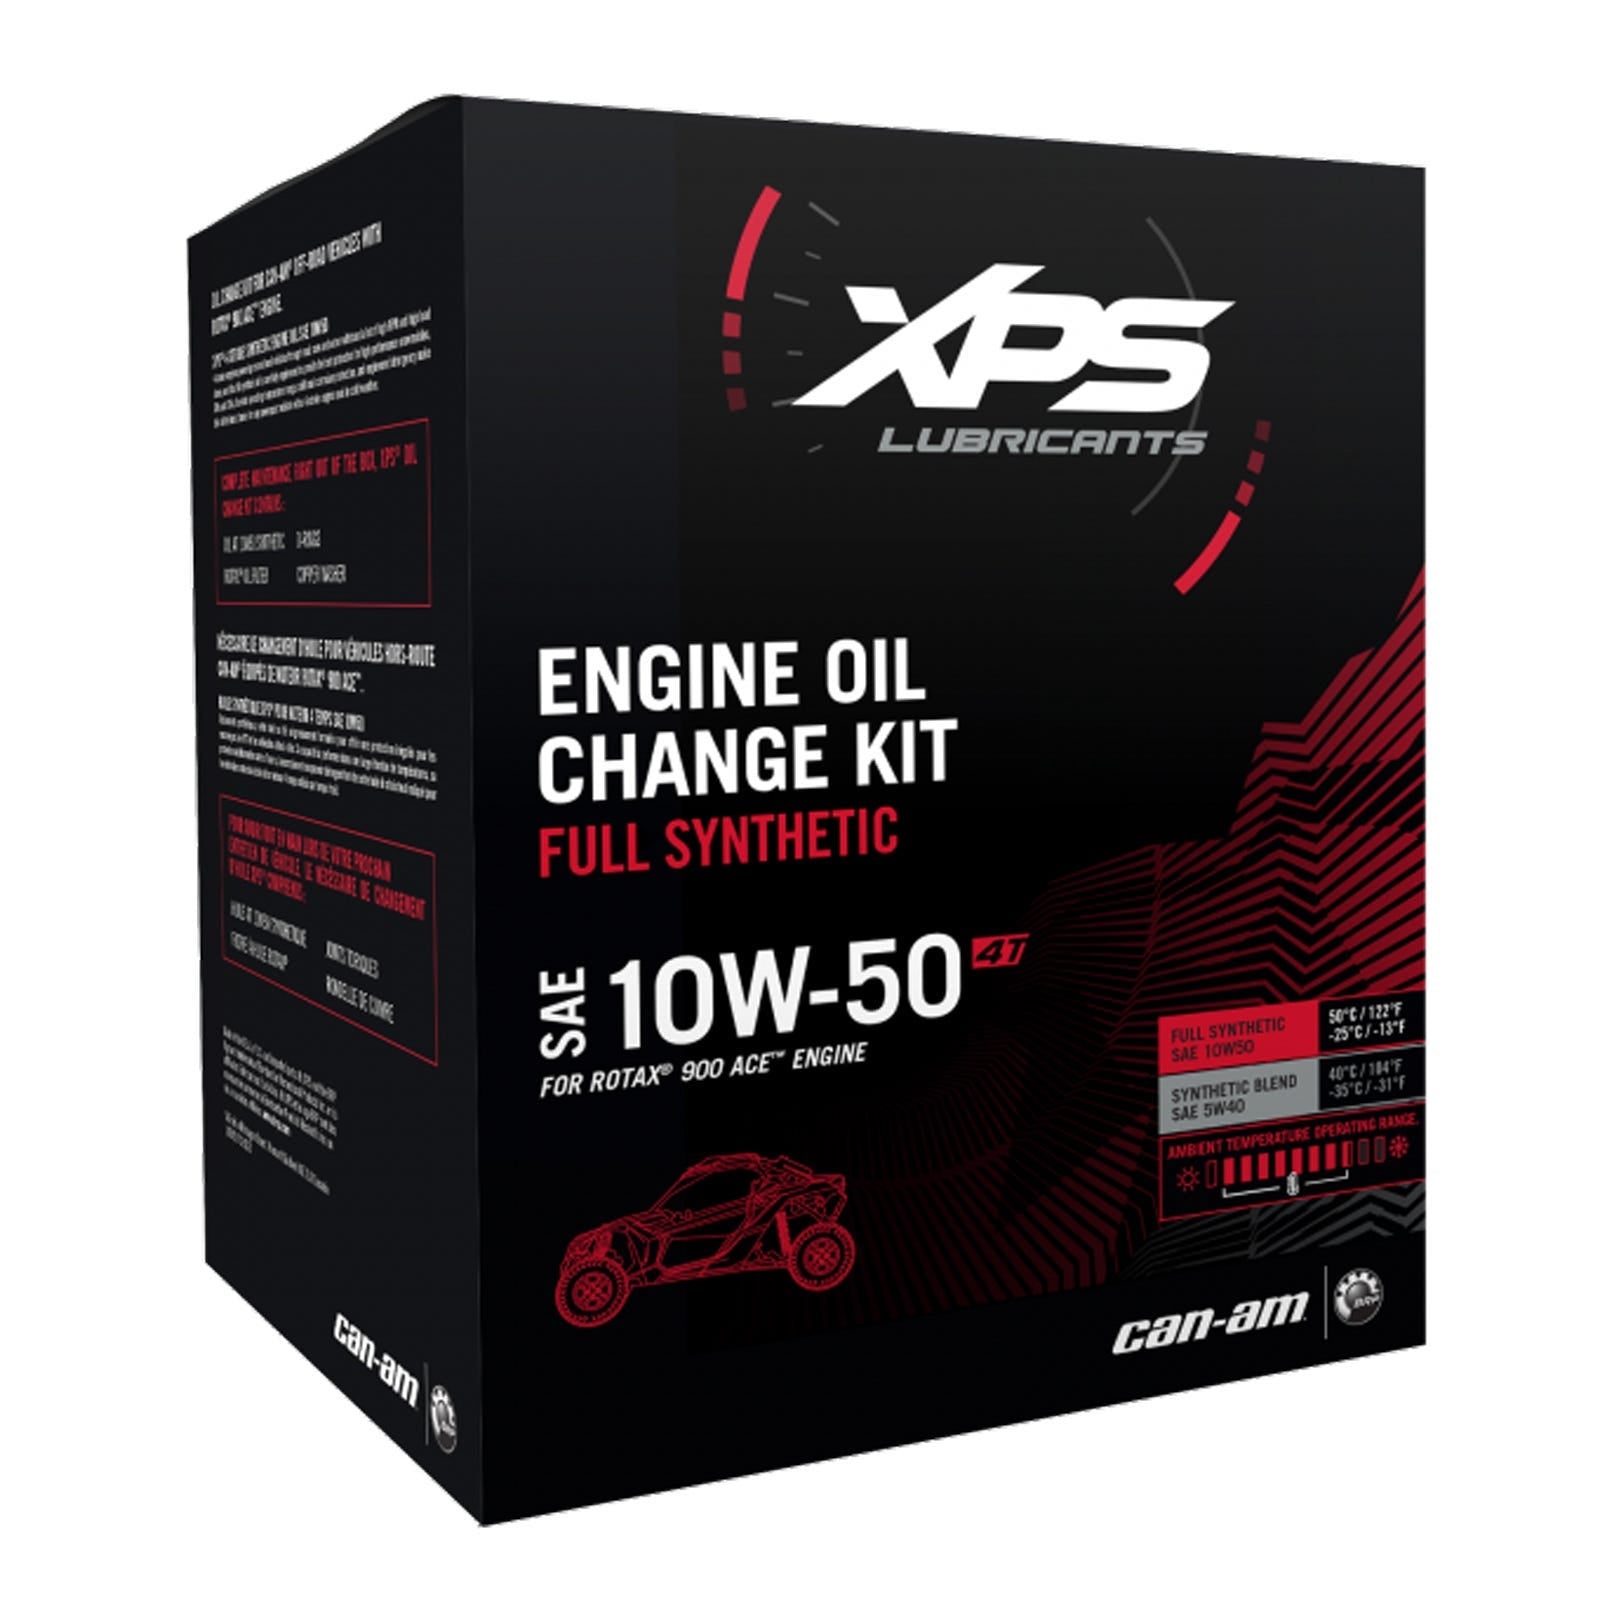 Can-am 4T 10W-50 Synthetic Oil Change Kit for Rotax 900 ACE engine 779261 - The Parts Lodge